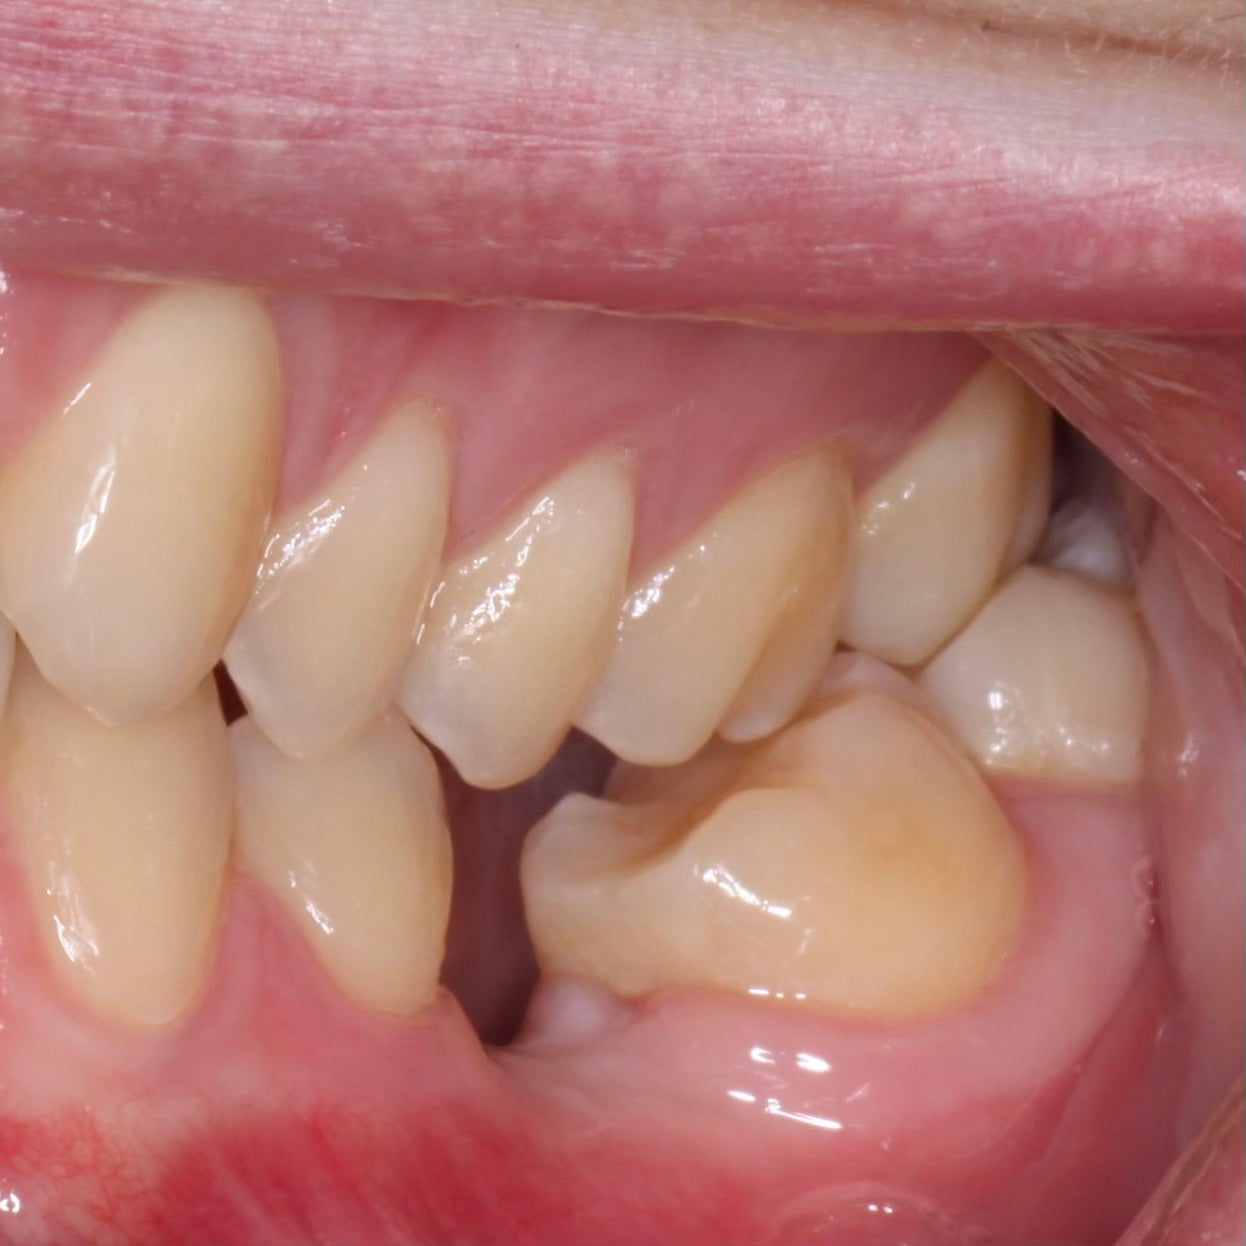 Dental Implant Replacement in Sight 35 and restorative considerations